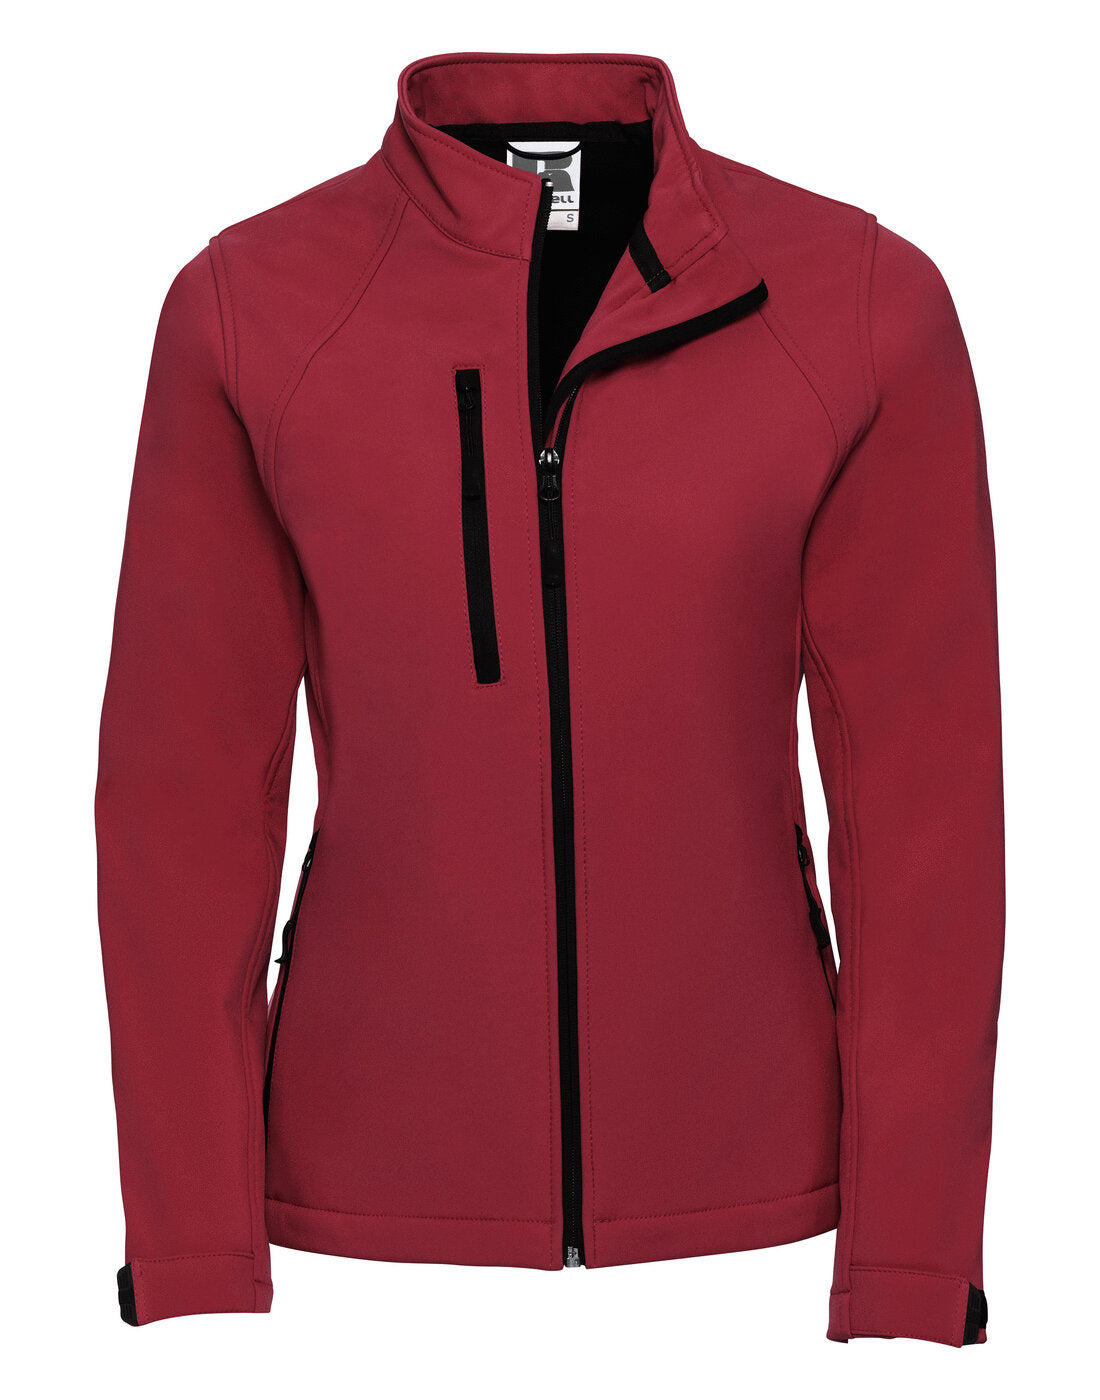 Russell Ladies Softshell Jacket - Classic Red